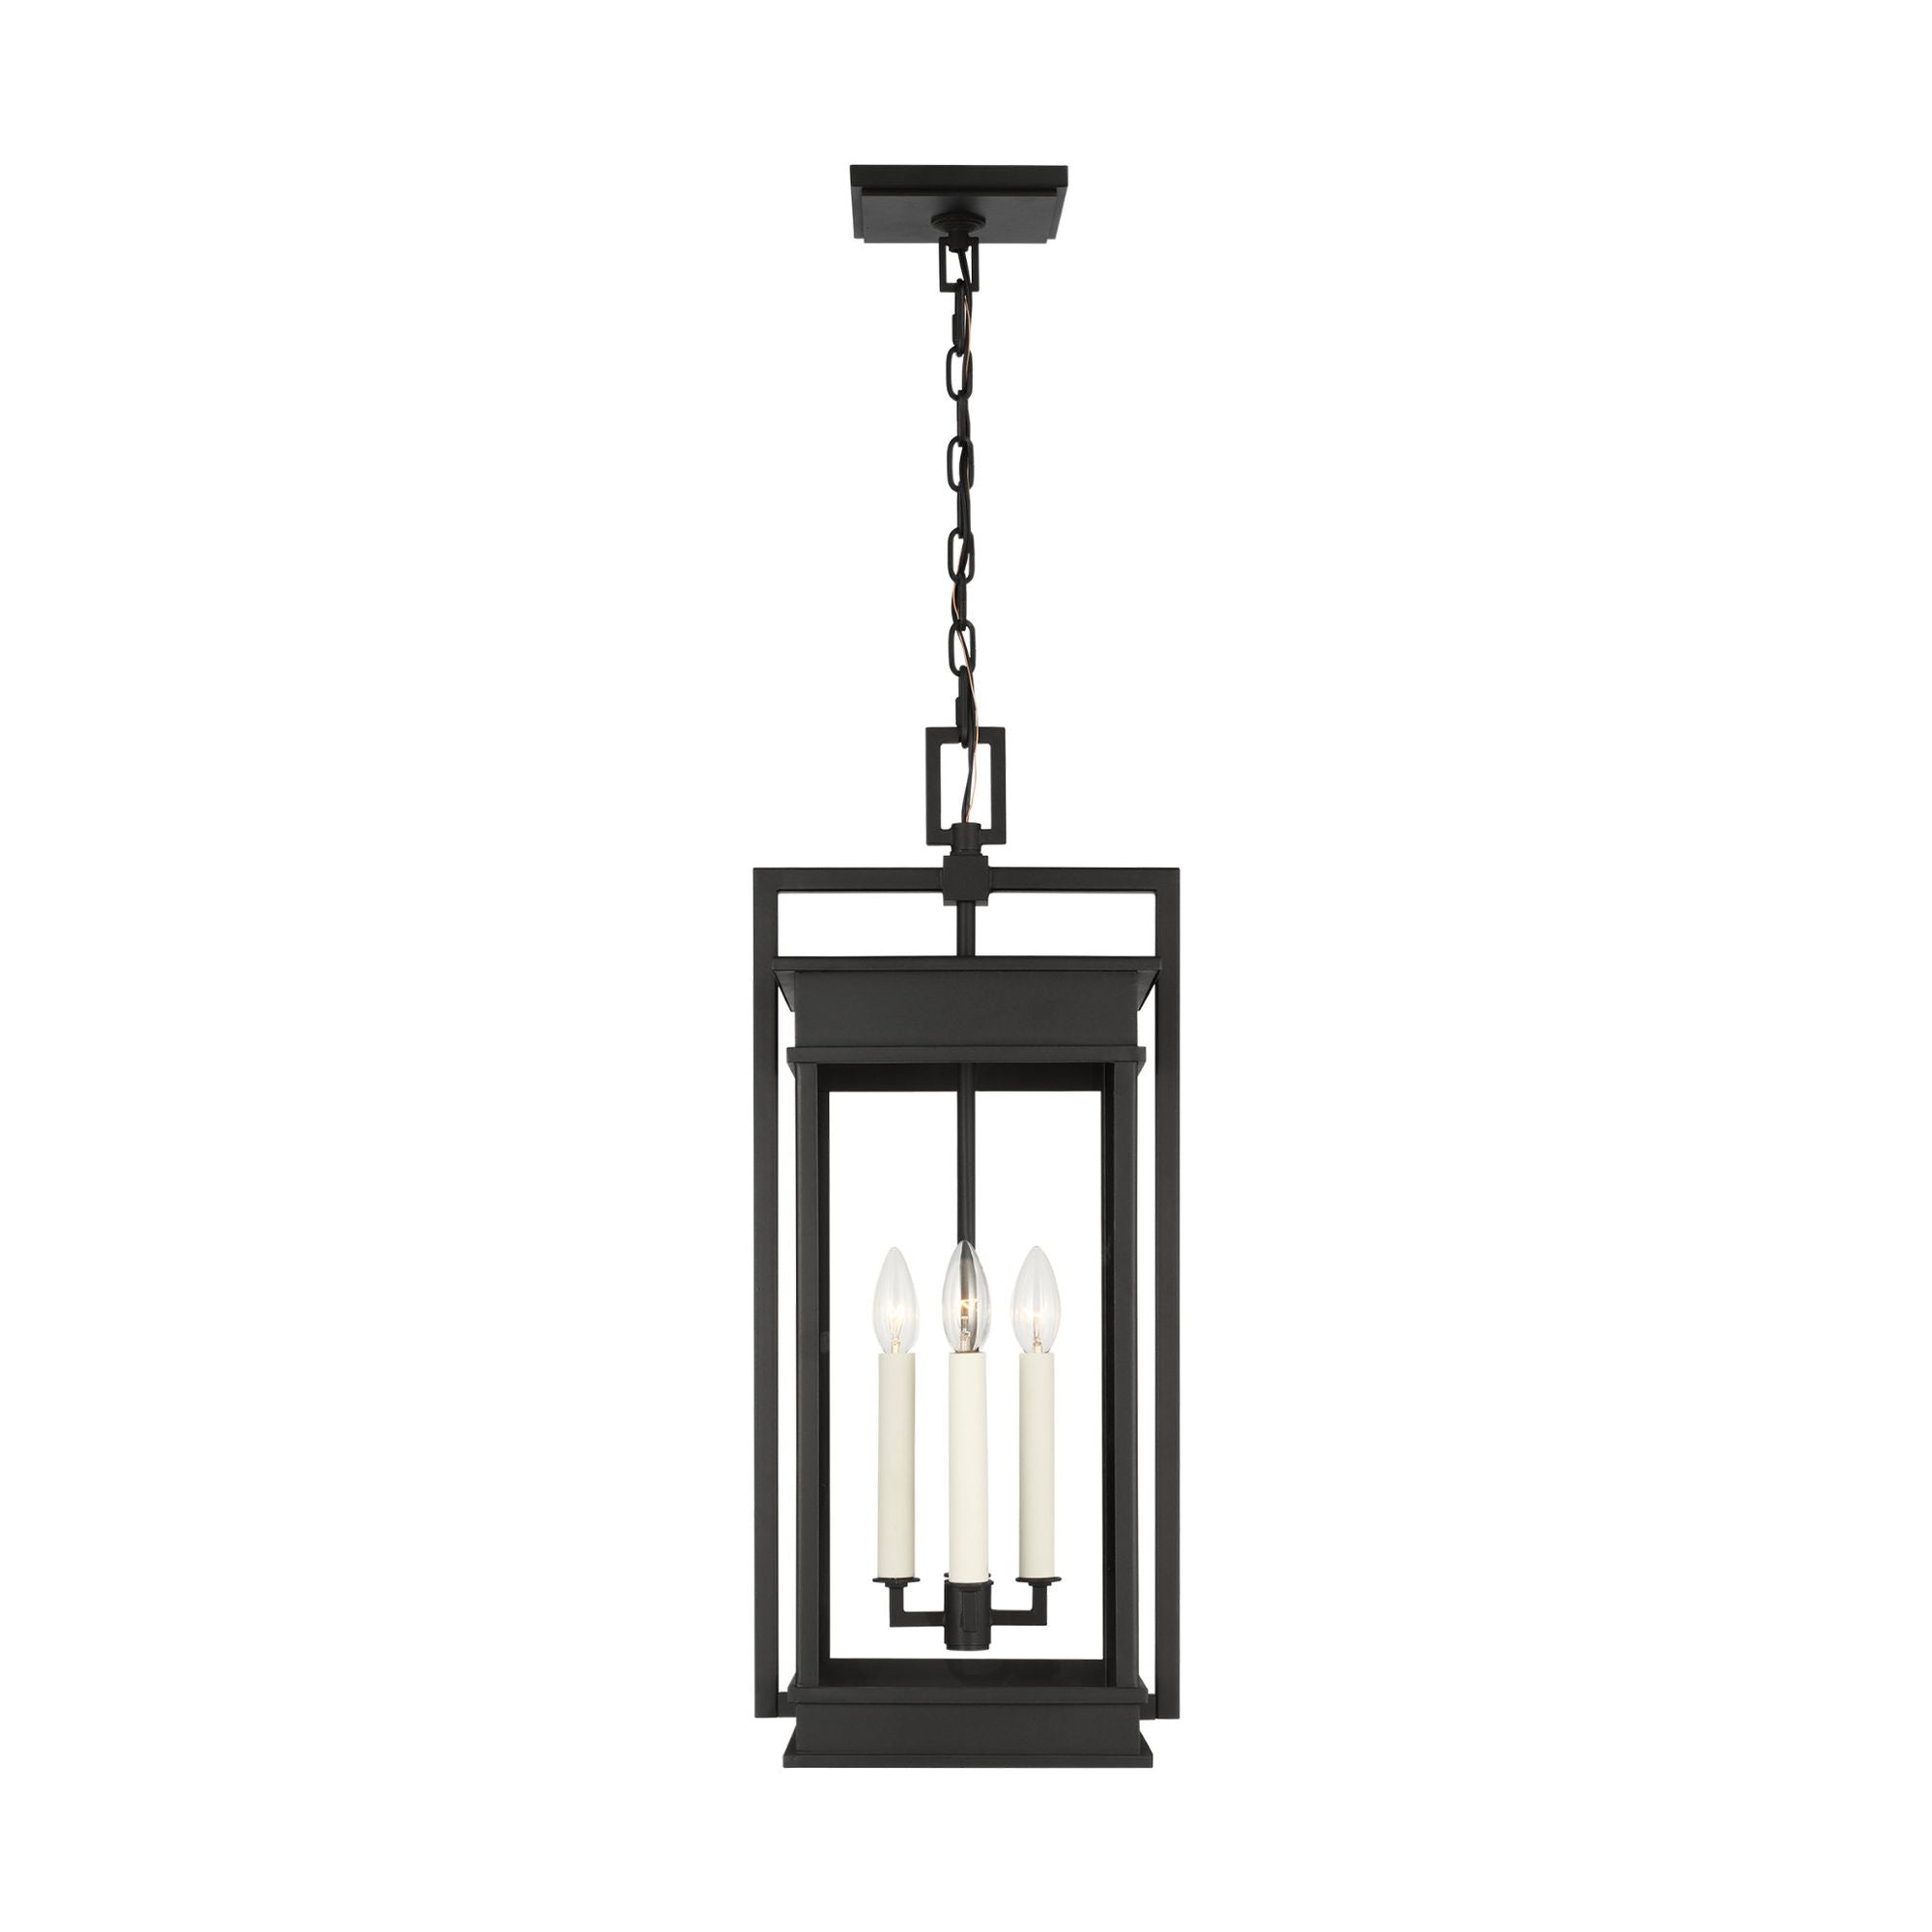 Chapman & Myers Cupertino Large Pendant in Textured Black